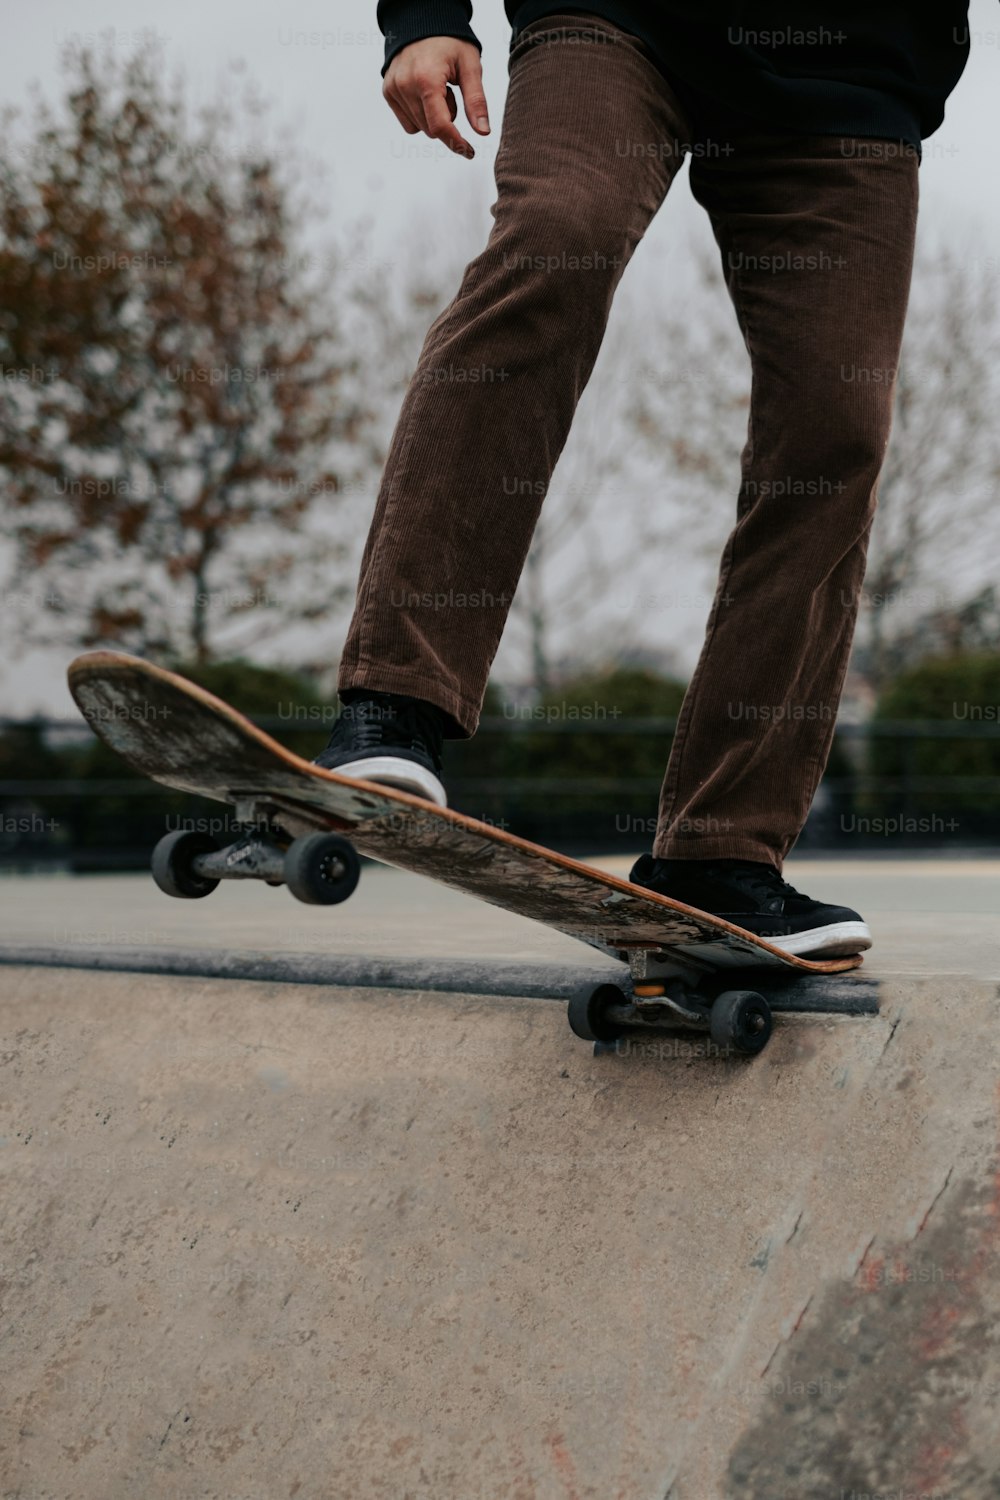 a person skating on a ramp